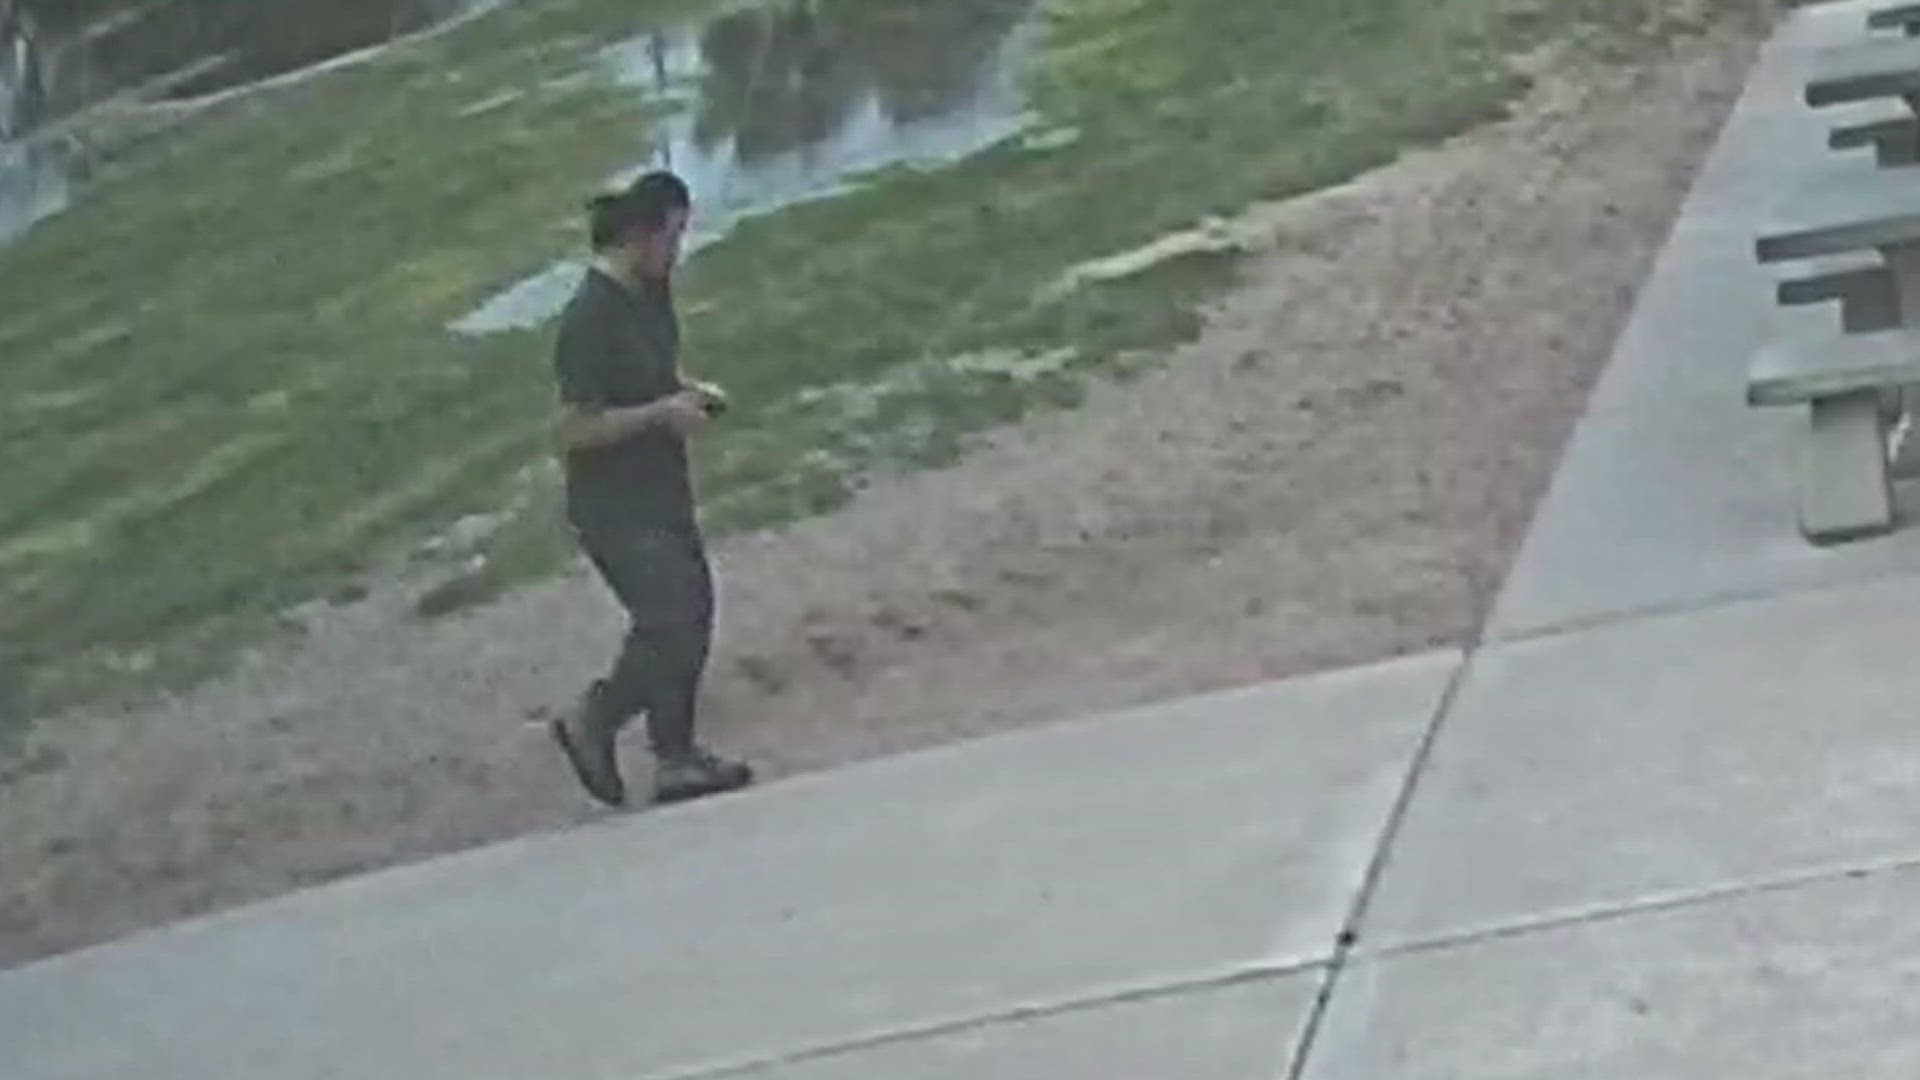 The incident happened on March 14 at a park near a high school and elementary school in Tempe.